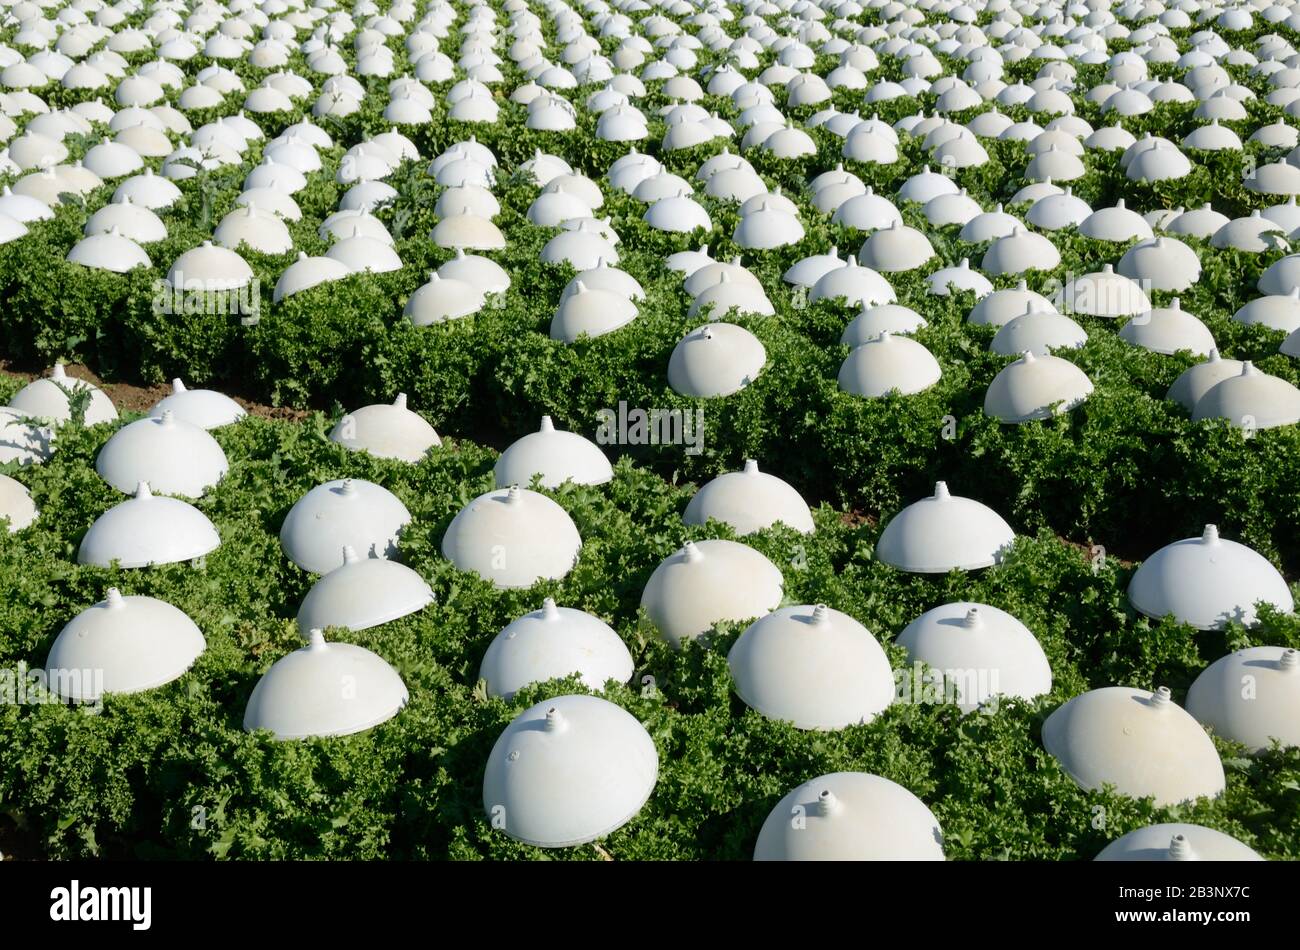 Rows of Lettuces Growing Under Plastic Cloches in Field of Intensive Agriculture, Market Gardening or Horticulture Provence France Stock Photo